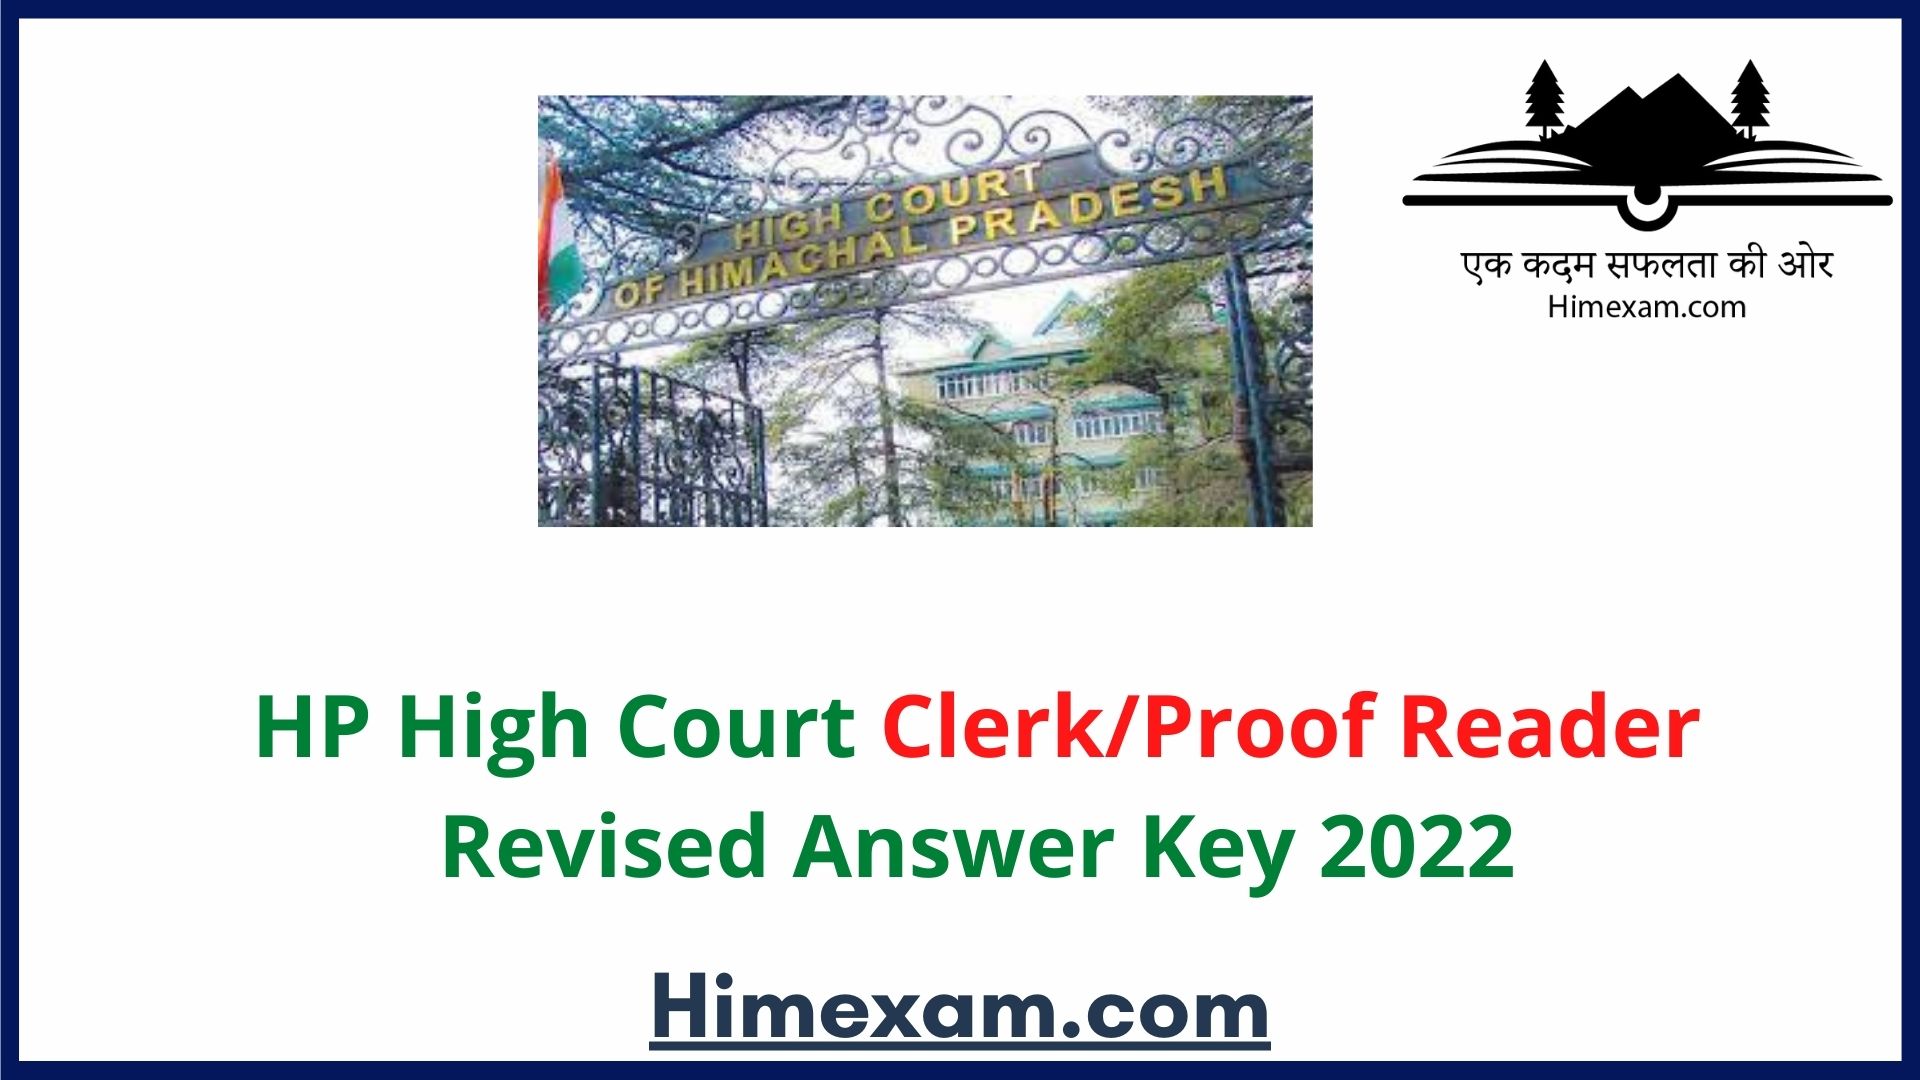 HP High Court Clerk/Proof Reader Revised Answer Key 2022